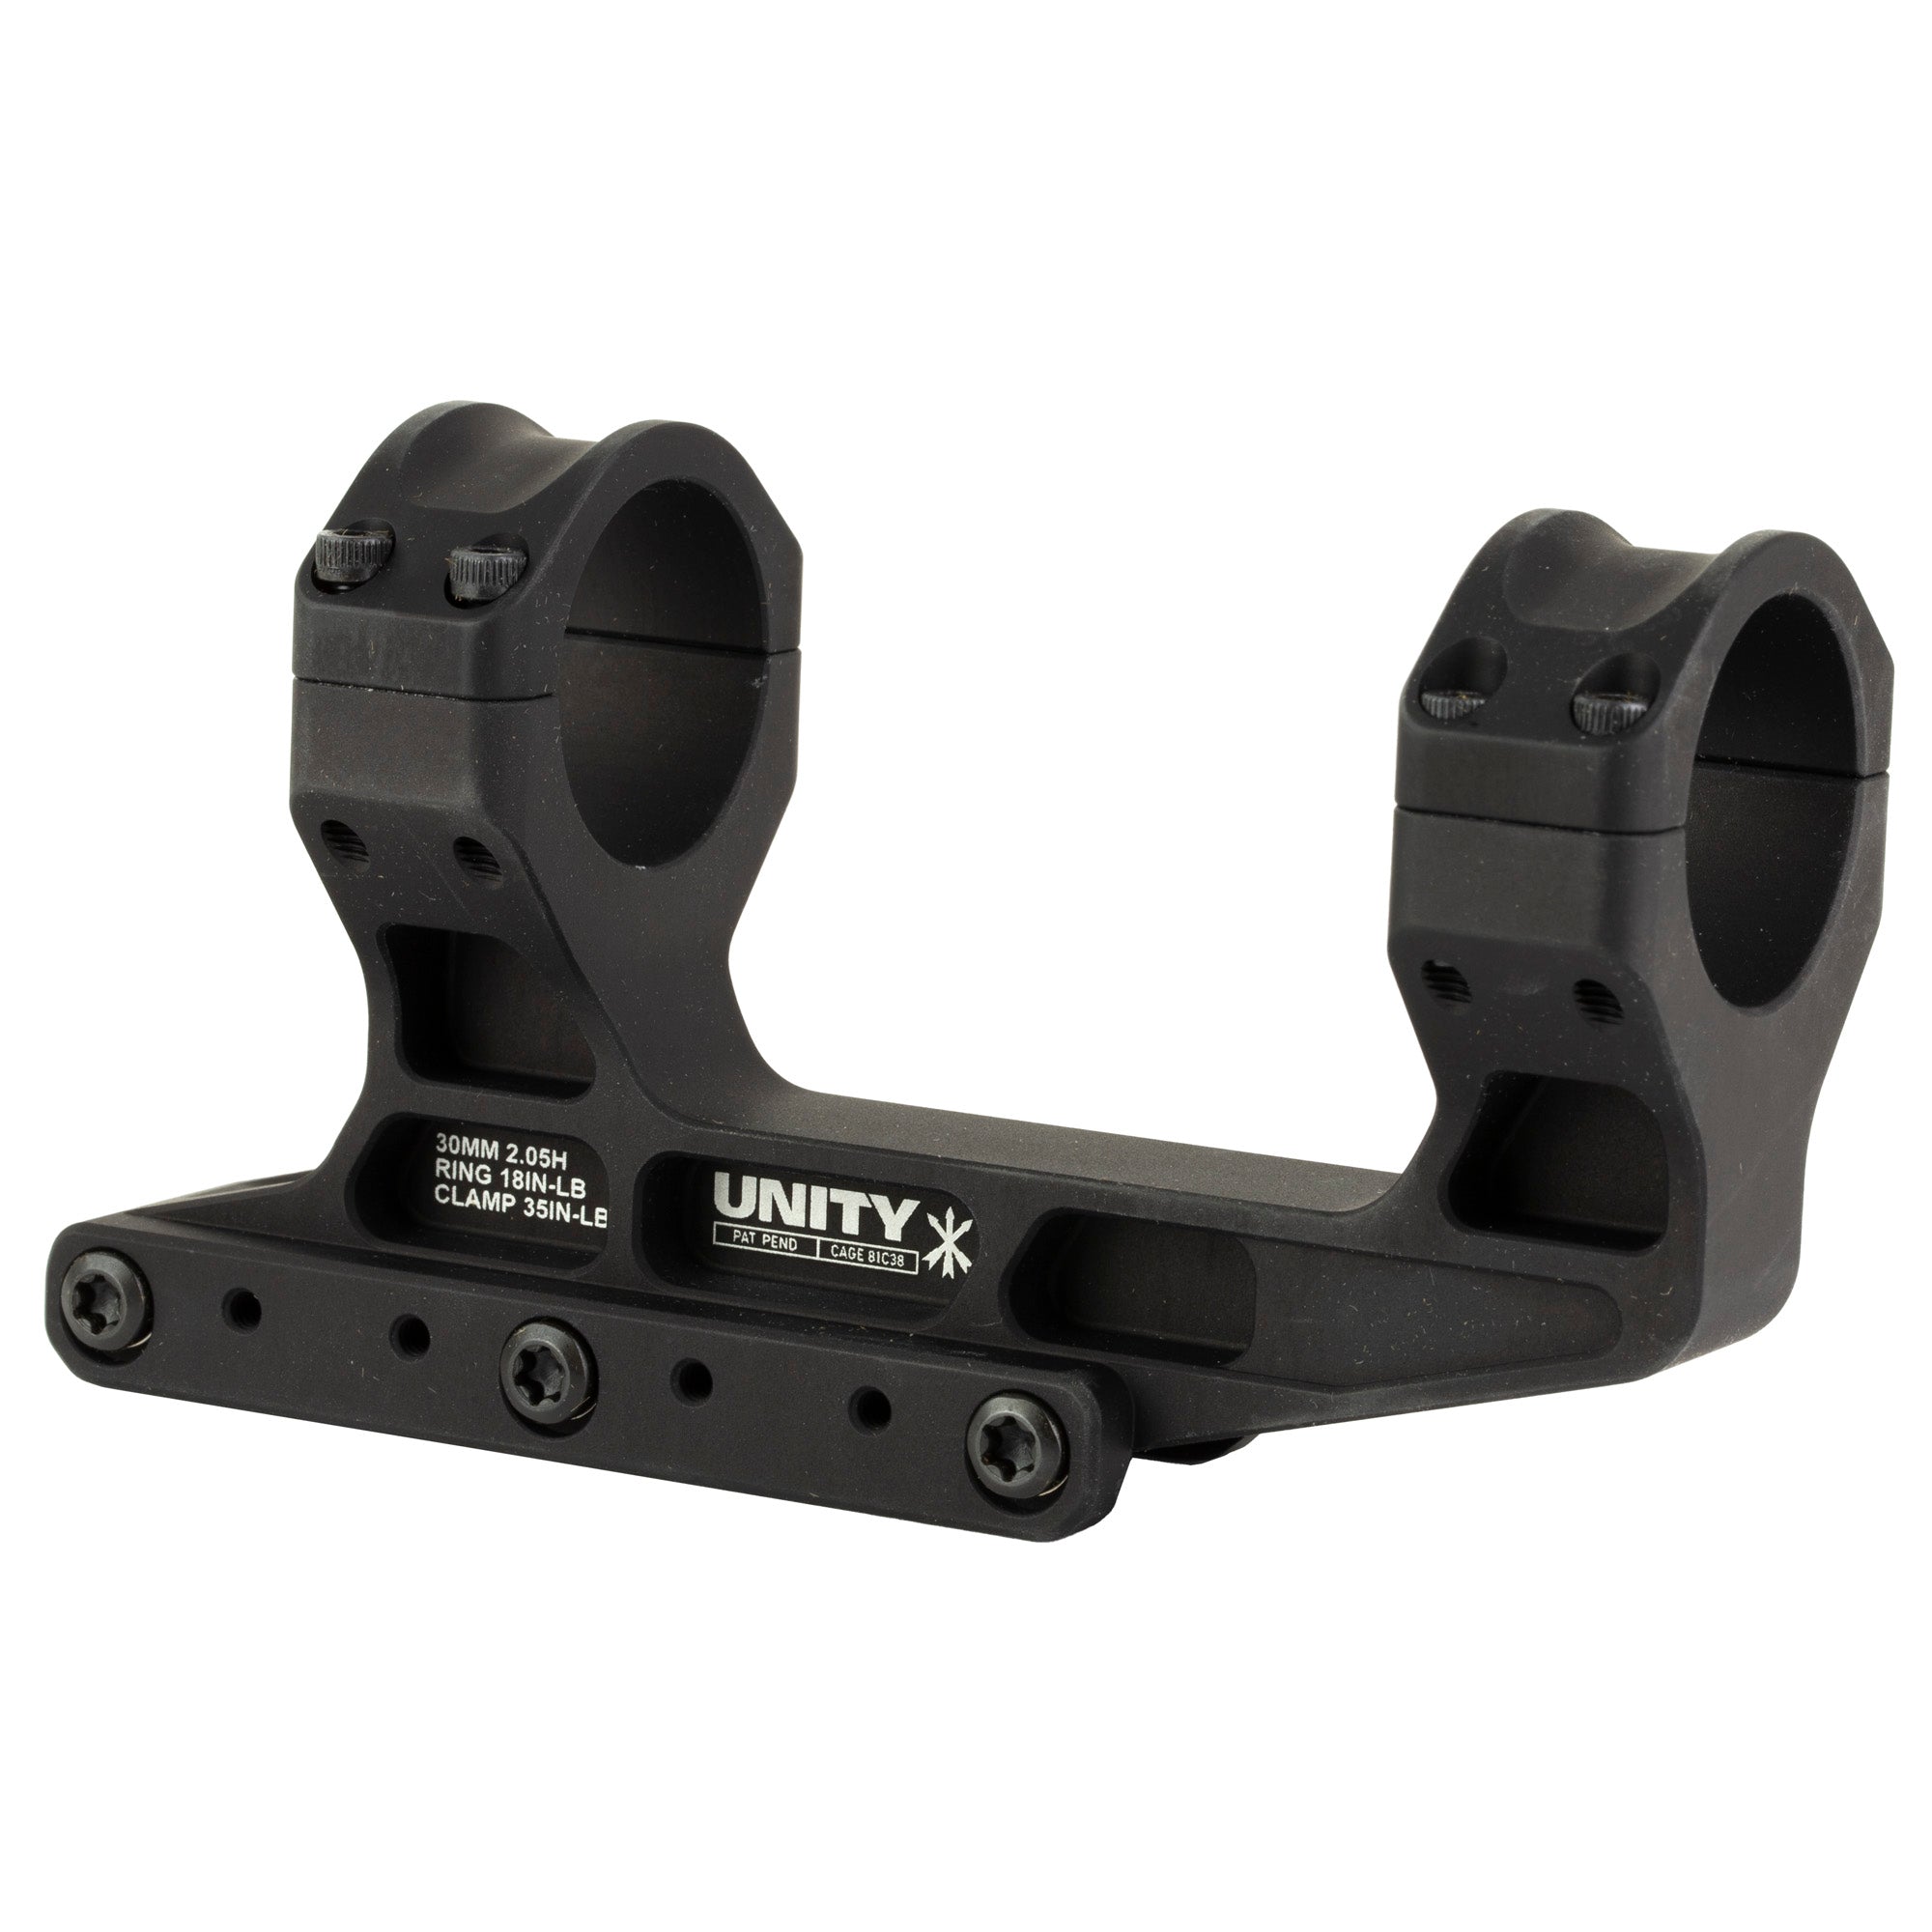 Unity Tactical FAST LPVO Mount in black, featuring a 2.05-inch optical height for 30mm tube size scopes, constructed from durable 7075-T6 aluminum with a hardcoat anodized finish.